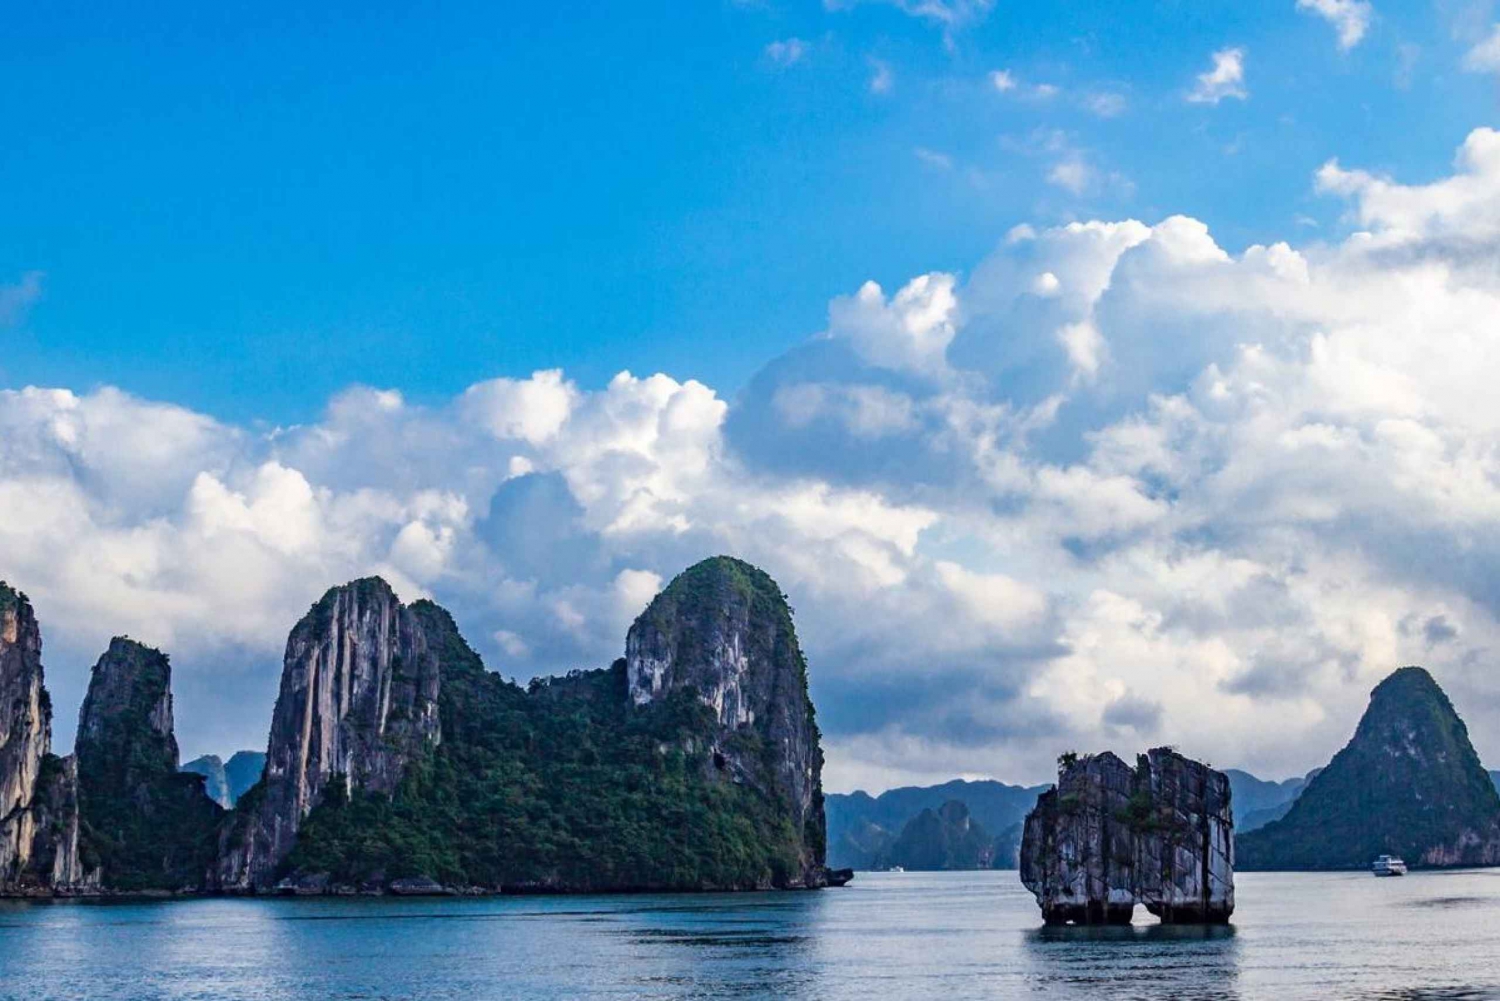 From Hanoi: Halong Bay Day Trip with Lunch and Transfers